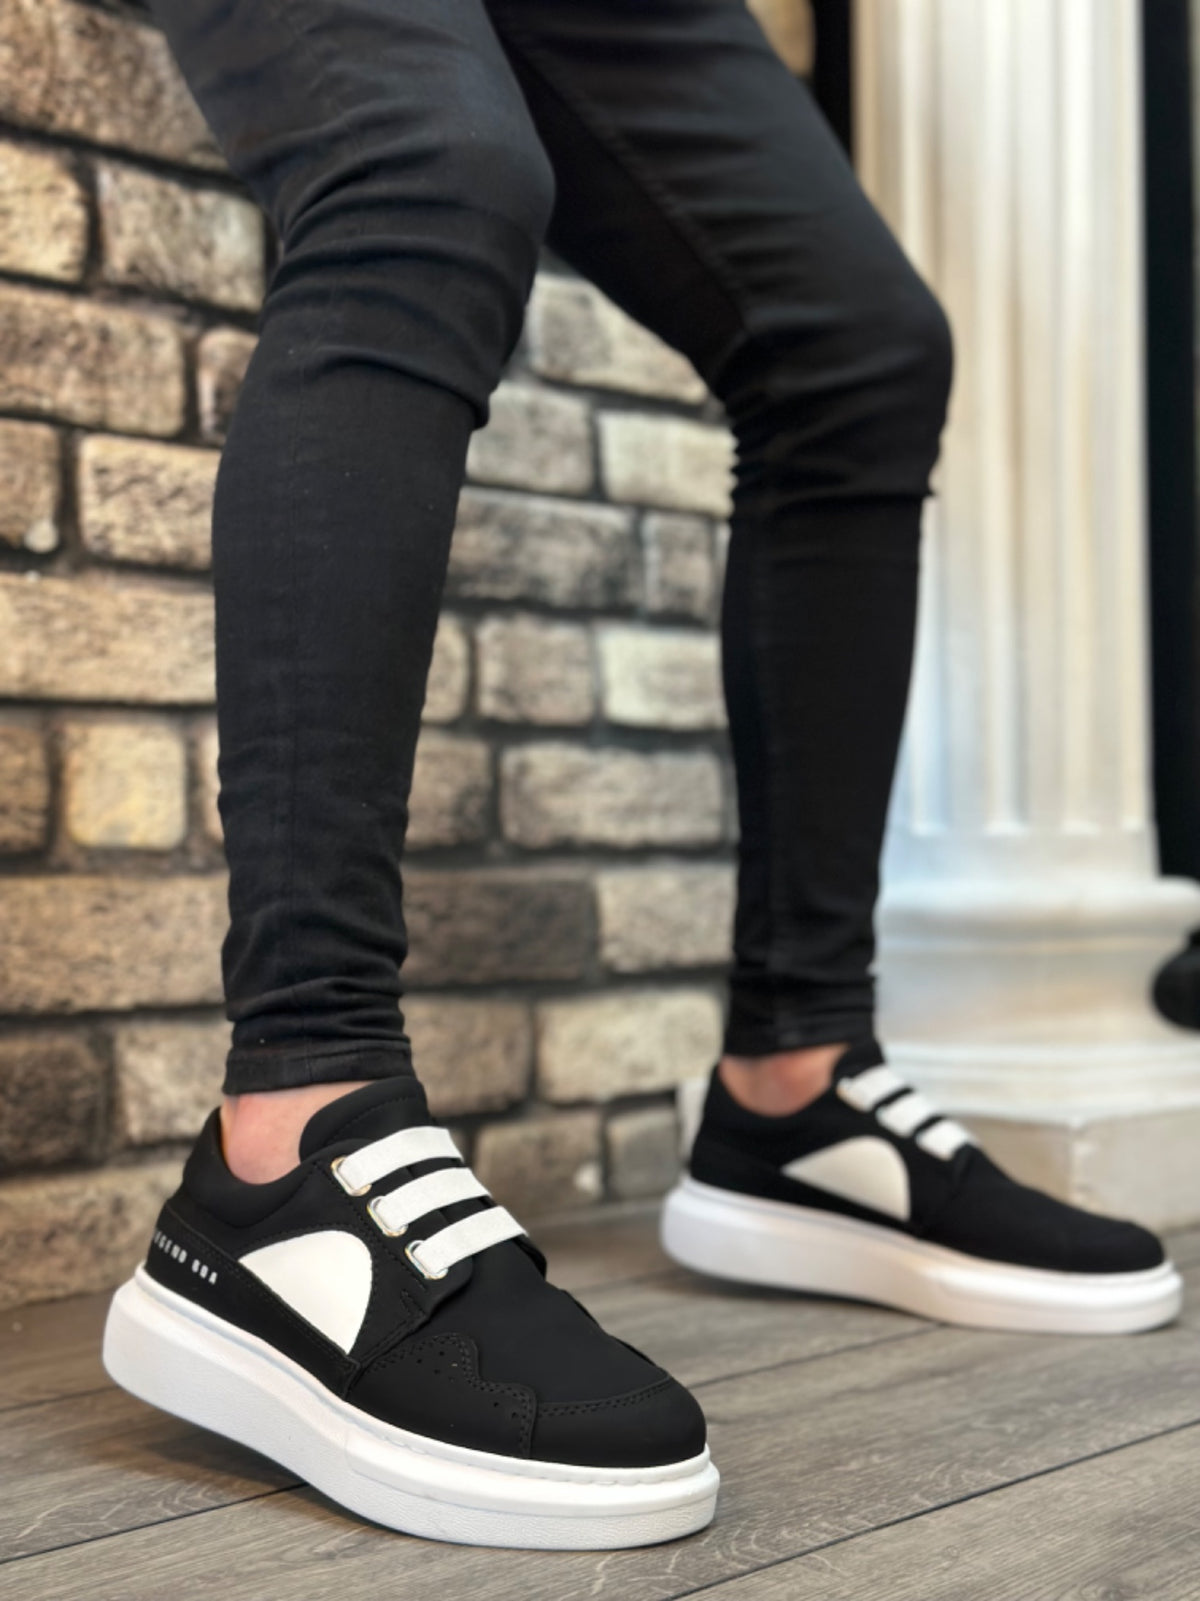 BA0302 Thick Sole Lace-Up Style Casual Black White Men's Sneakers Shoes - STREET MODE ™